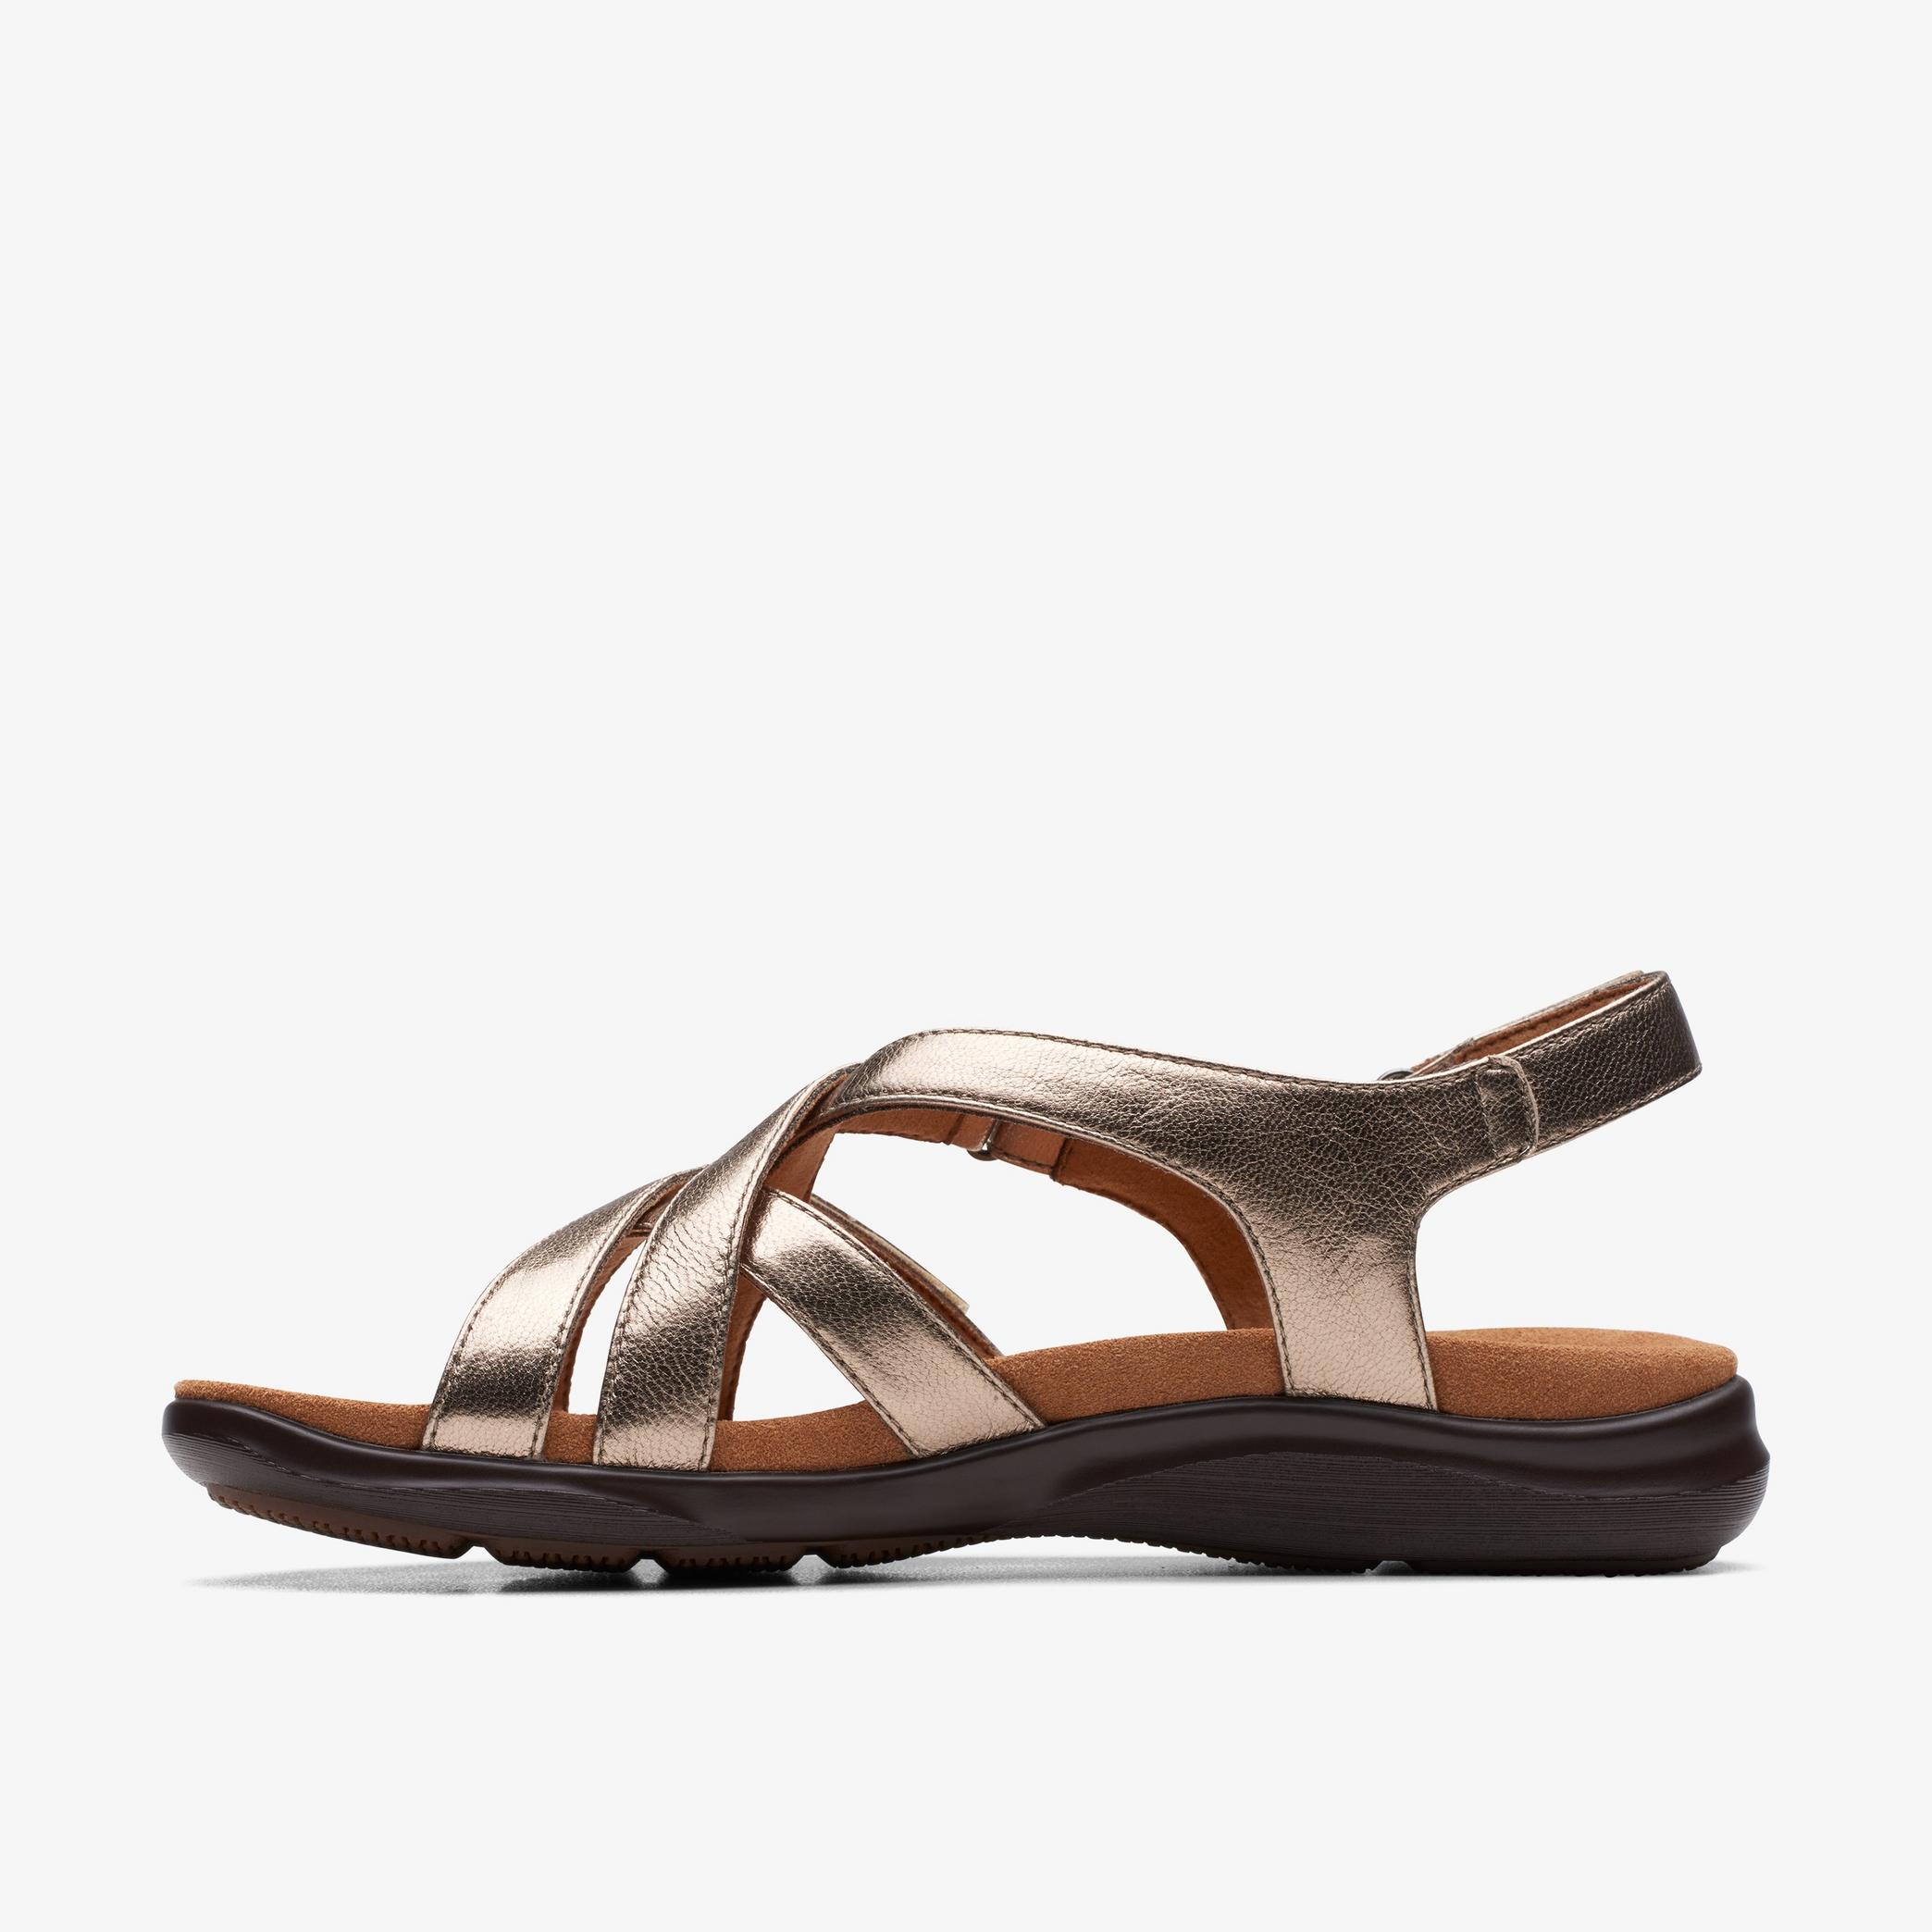 Kitly Go Metallic Flat Sandals, view 2 of 6